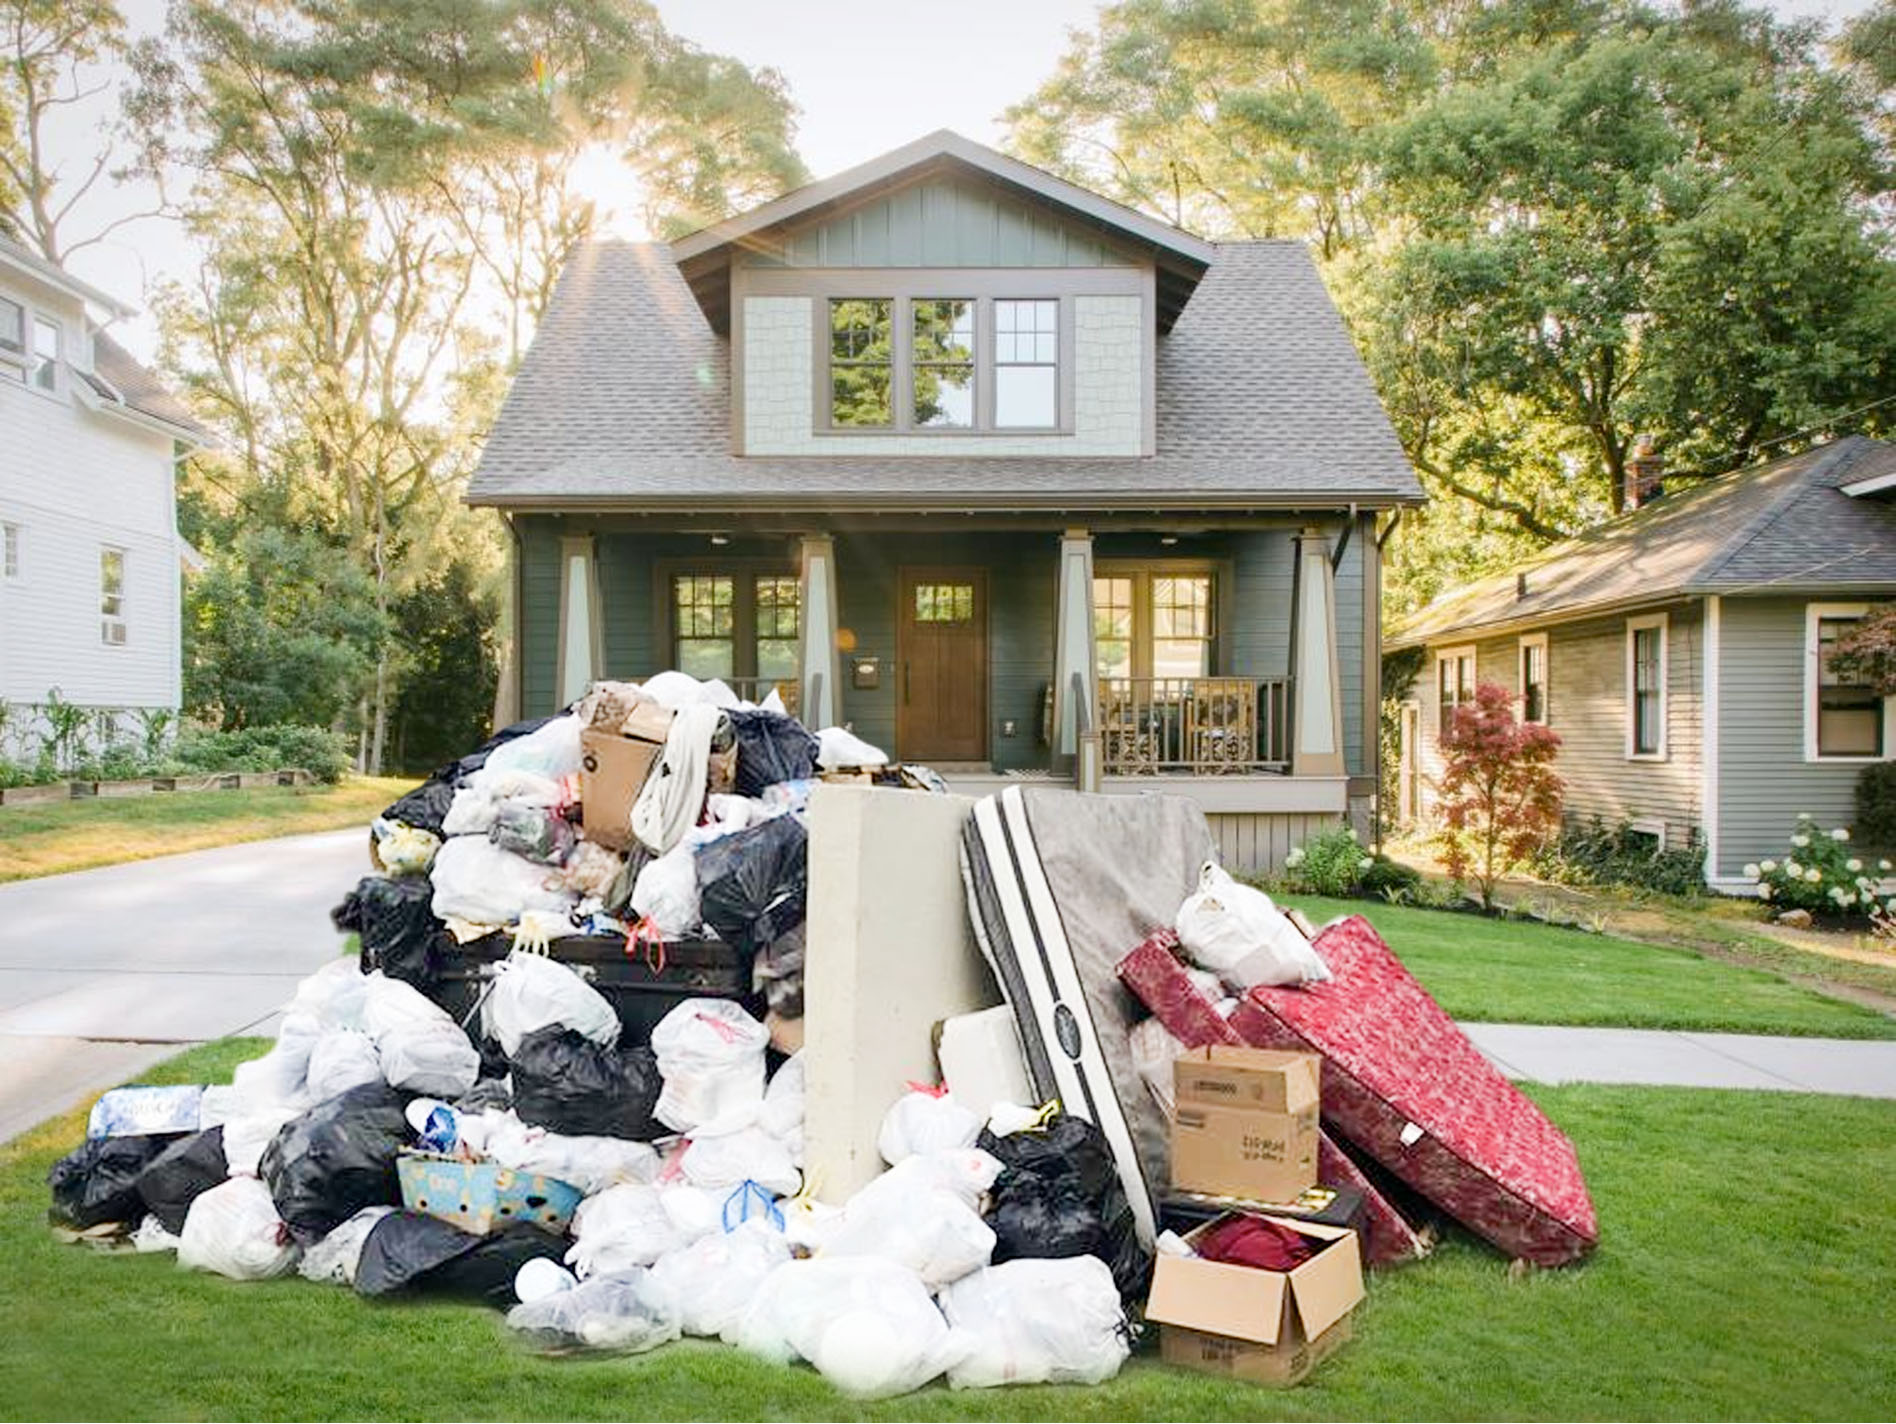 Get a complete guide about junk removal services